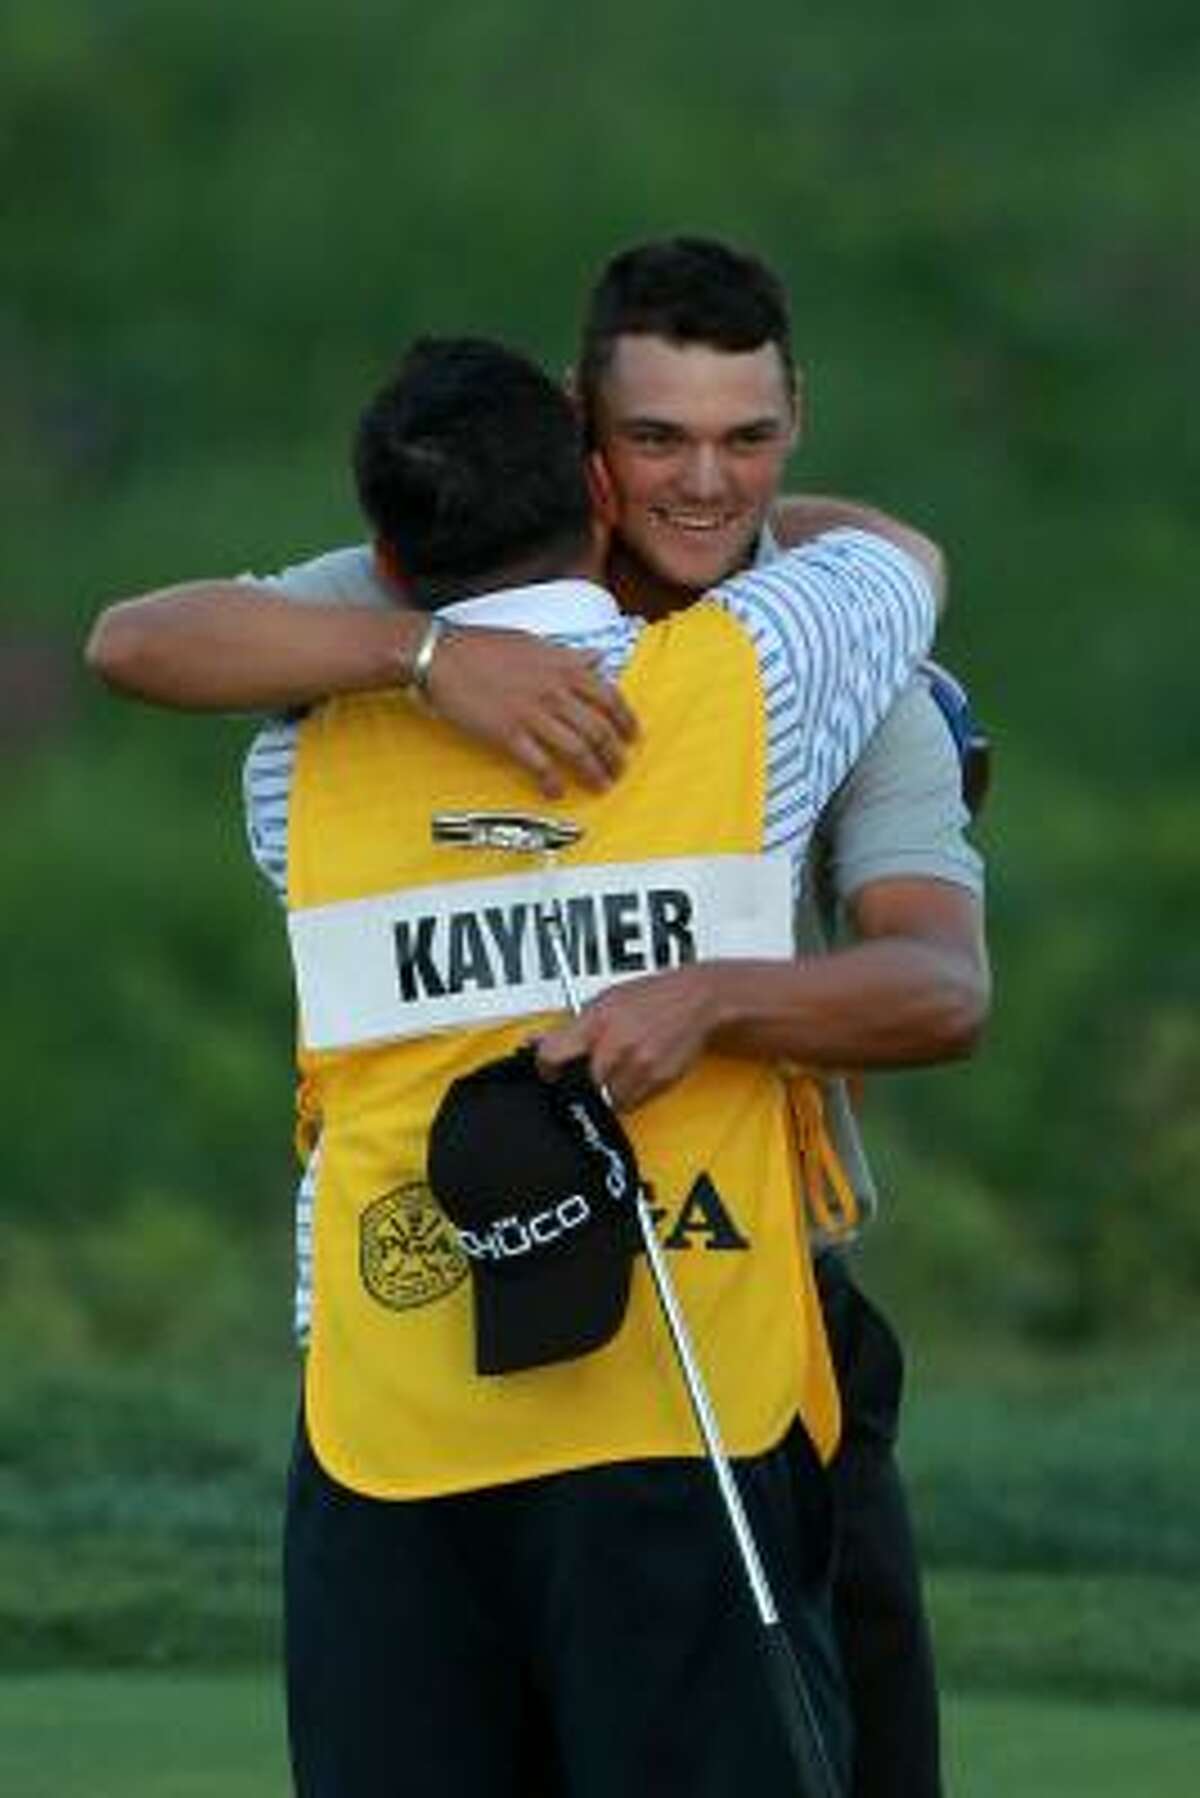 Martin Kaymer celebrates with his caddie, Craig Connelly, on the 18th green after winning the PGA Championship.